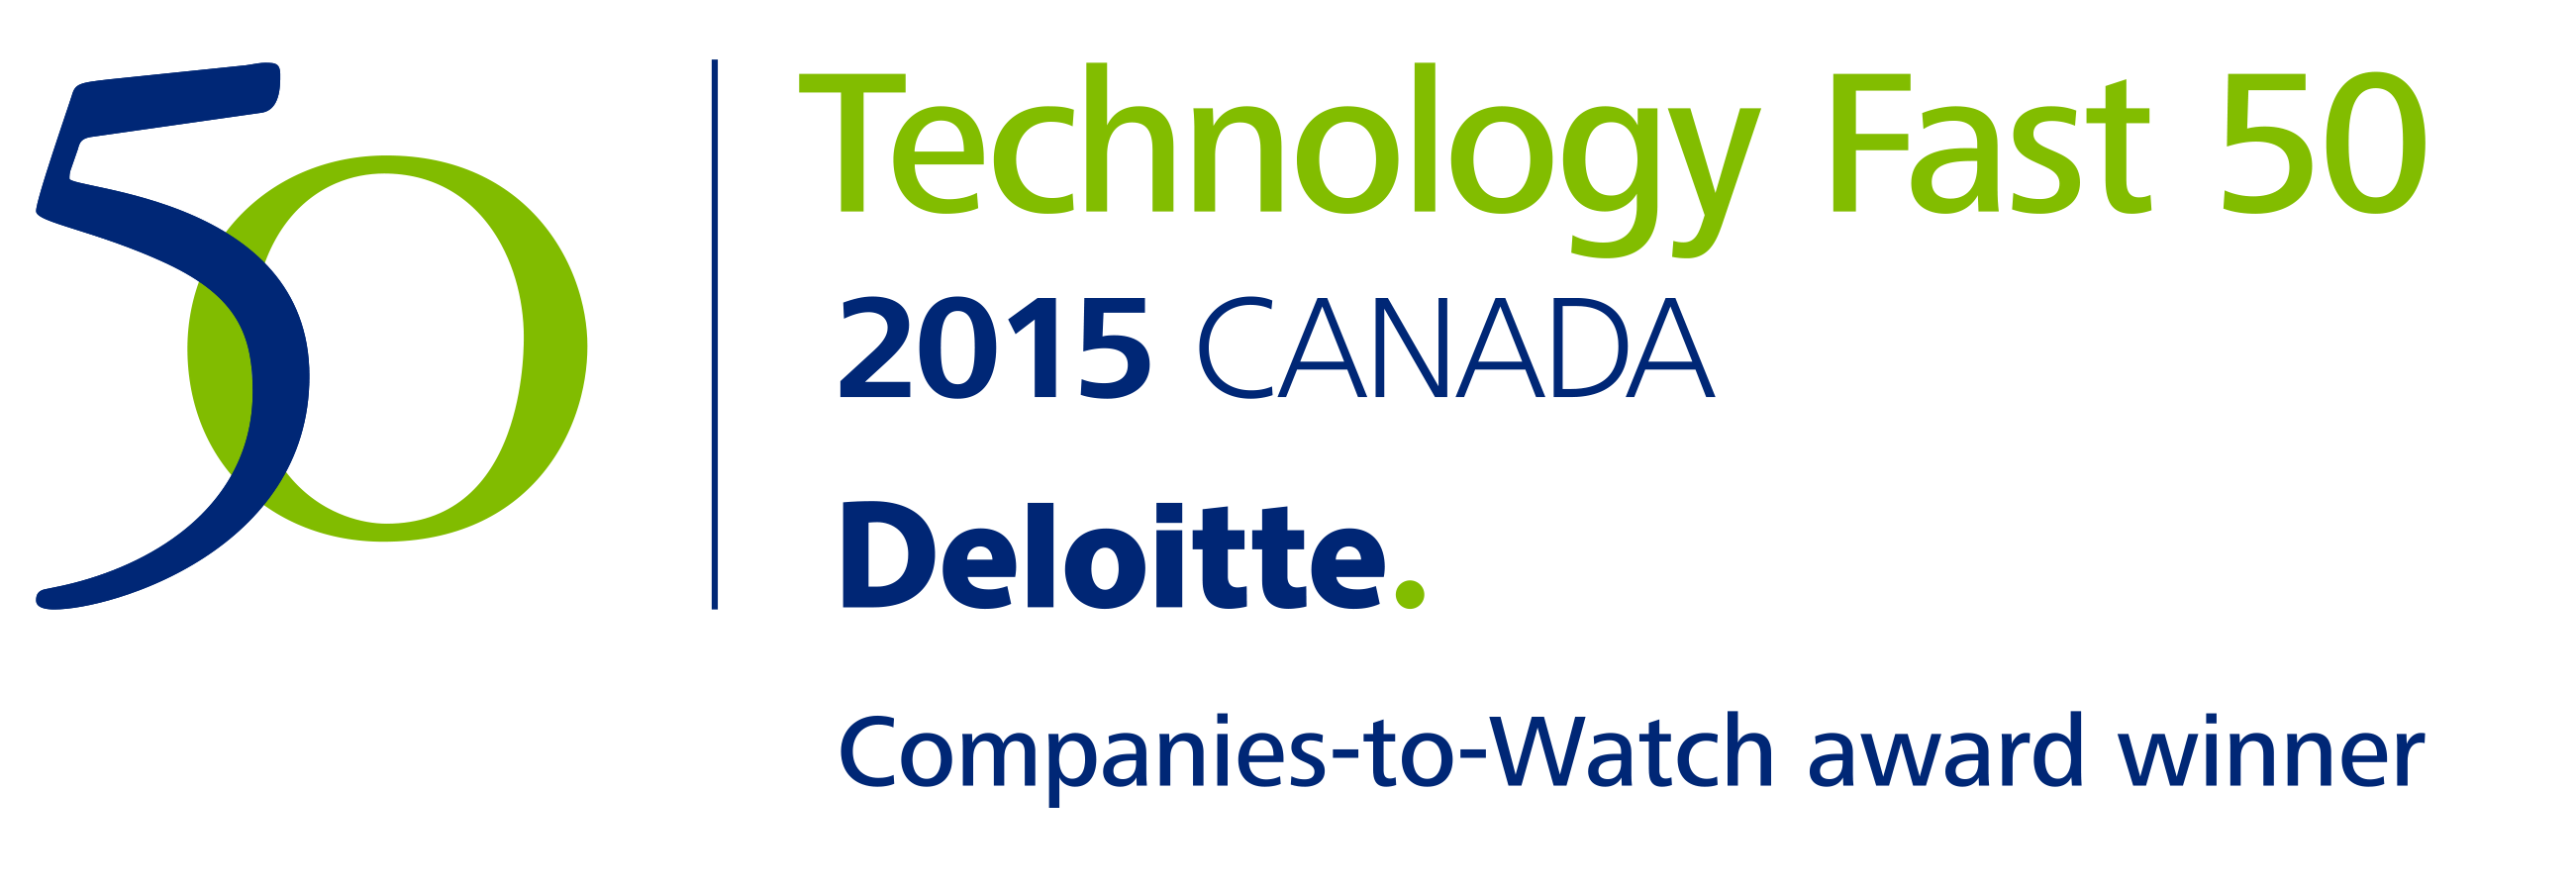 TrustPoint Innovation Named One of Canada's Companies to Watch in the 2015 Deloitte Technology Fast 50 Awards